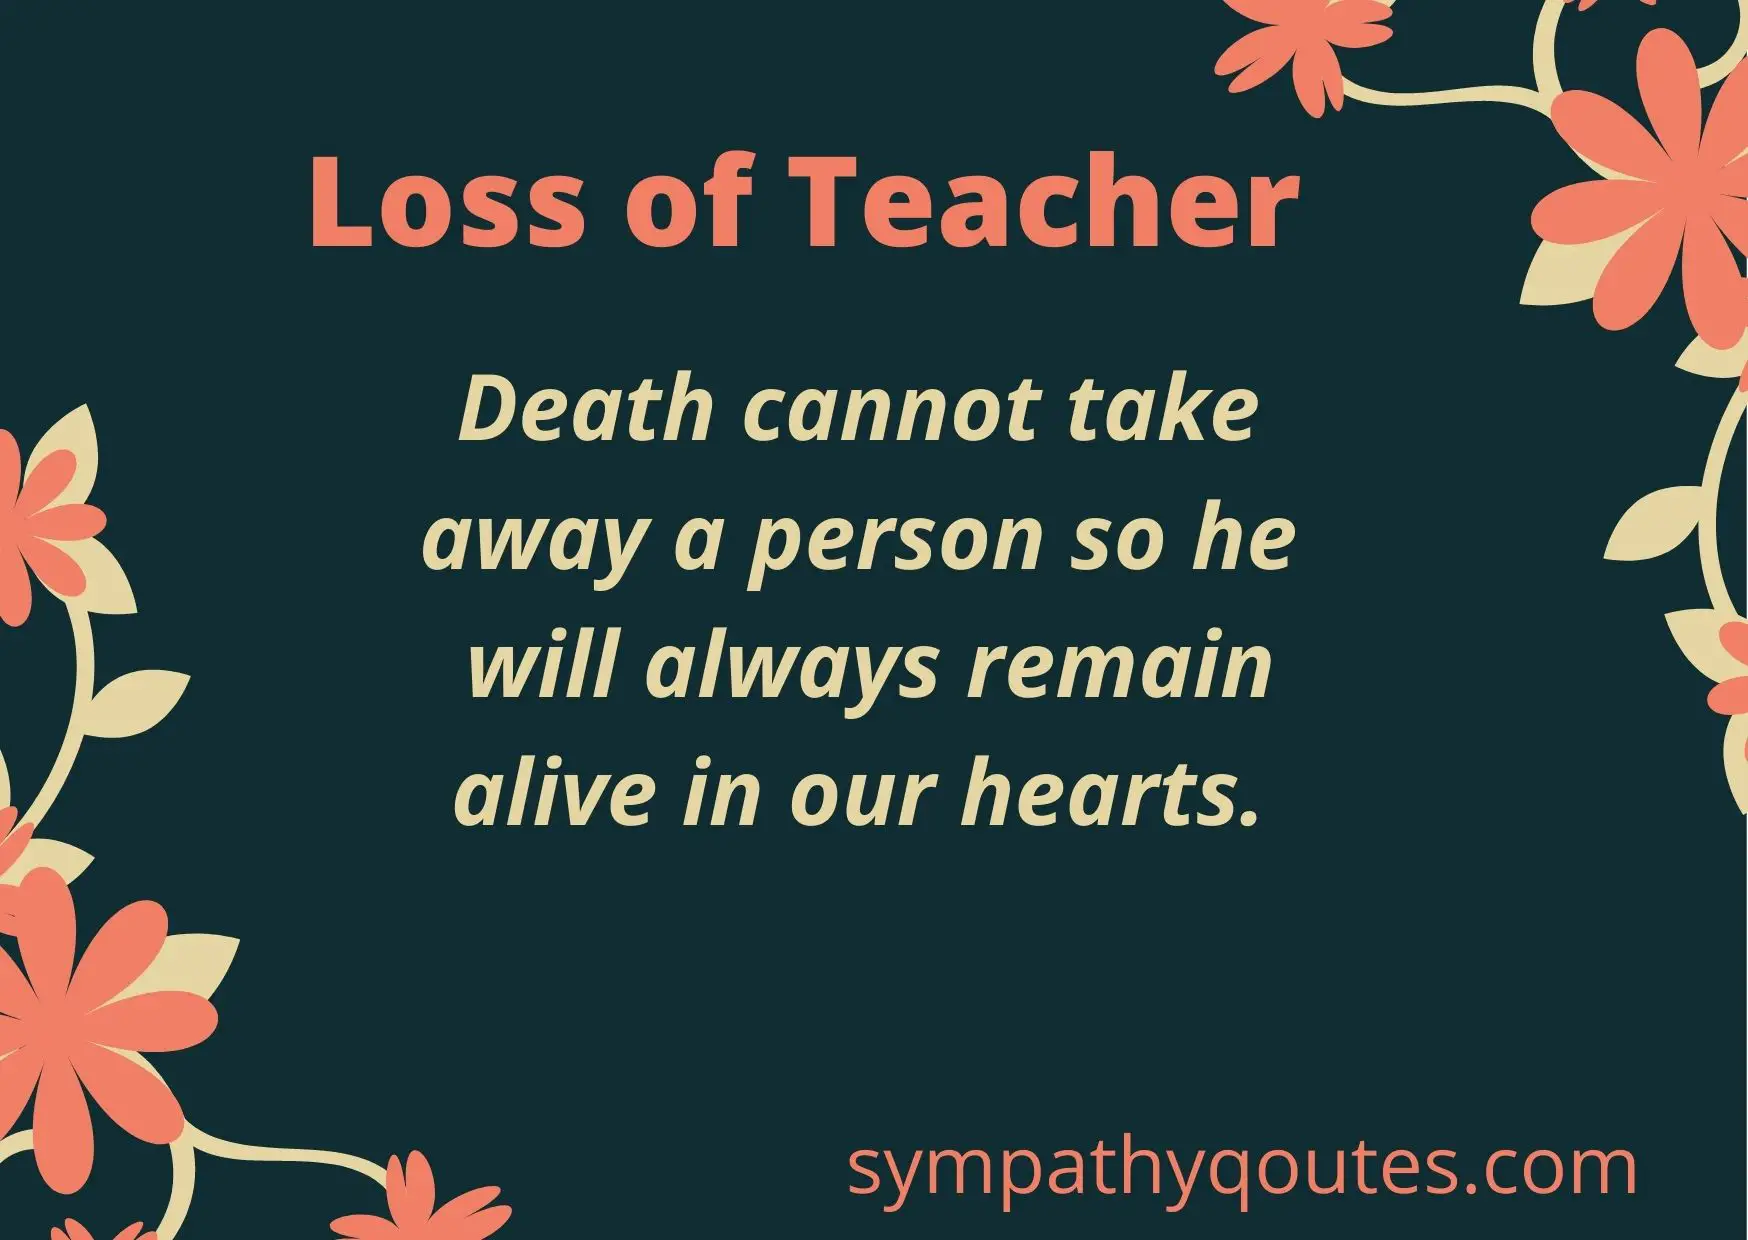 Sympathy Quotes for Loss of Teacher